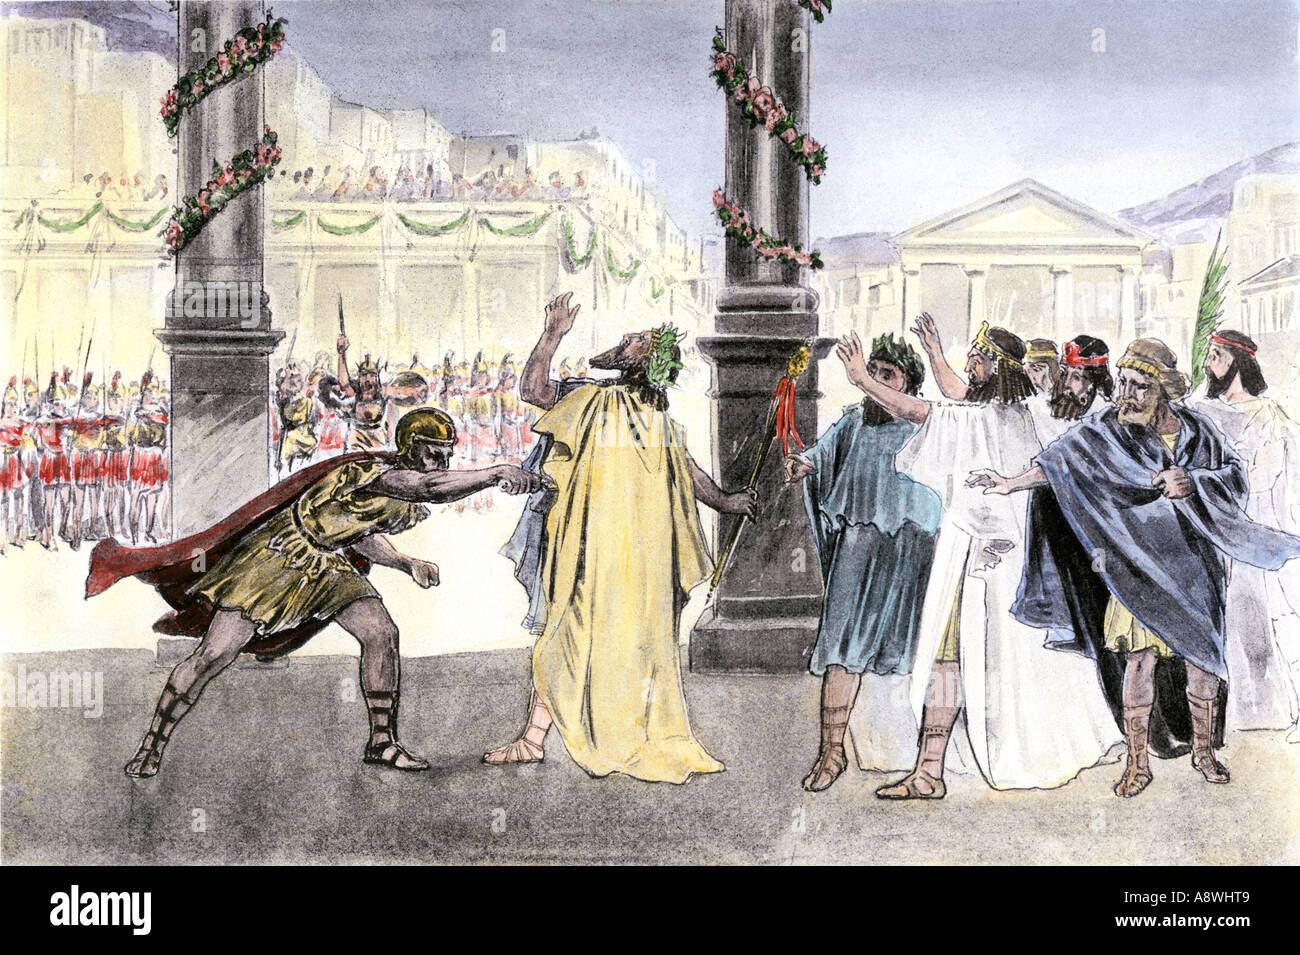 Assassination of Philip II of Macedon causing his son Alexander to become king. Hand-colored halftone of an illustration Stock Photo